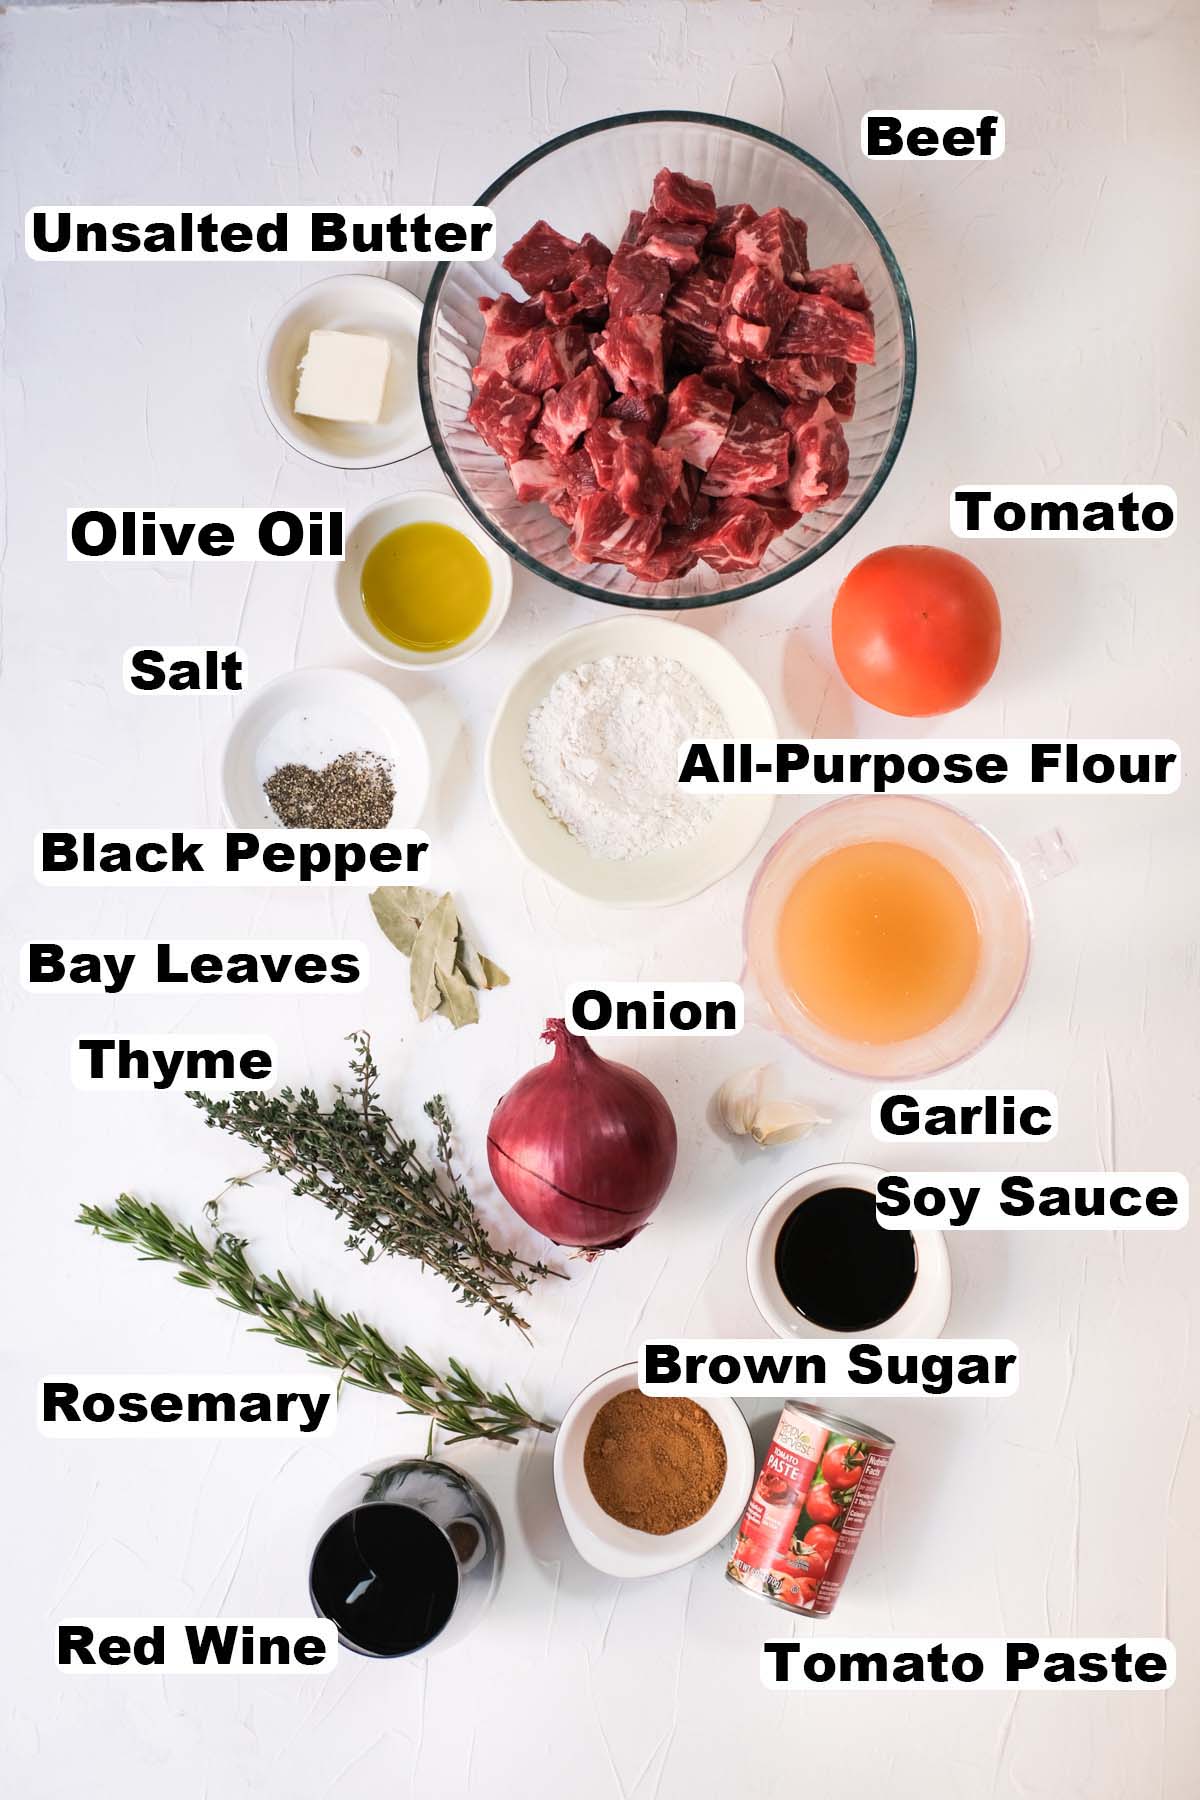 Ingredients for braised beef with red. wine recipe.